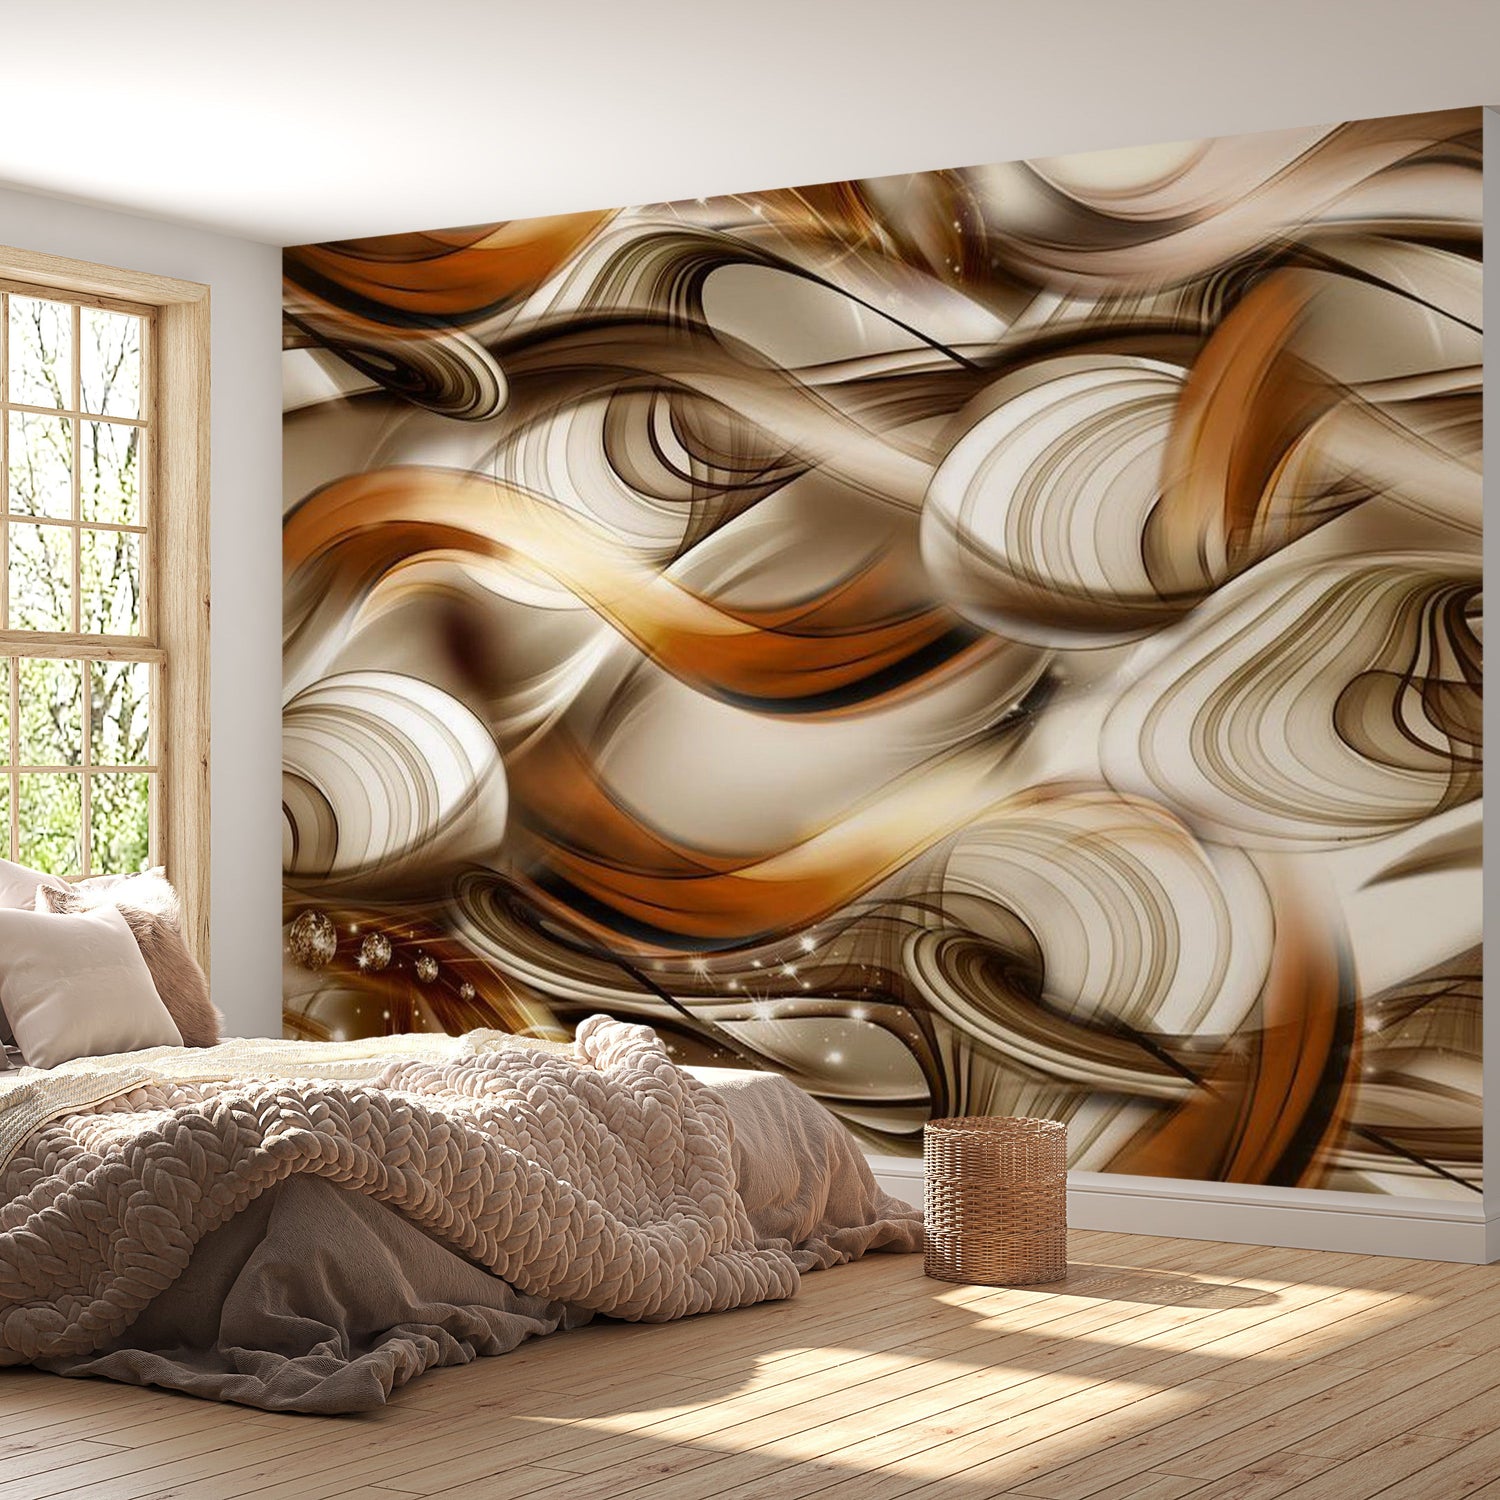 Peel & Stick Glam Wall Mural - Tangled Madness - Removable Wall Decals